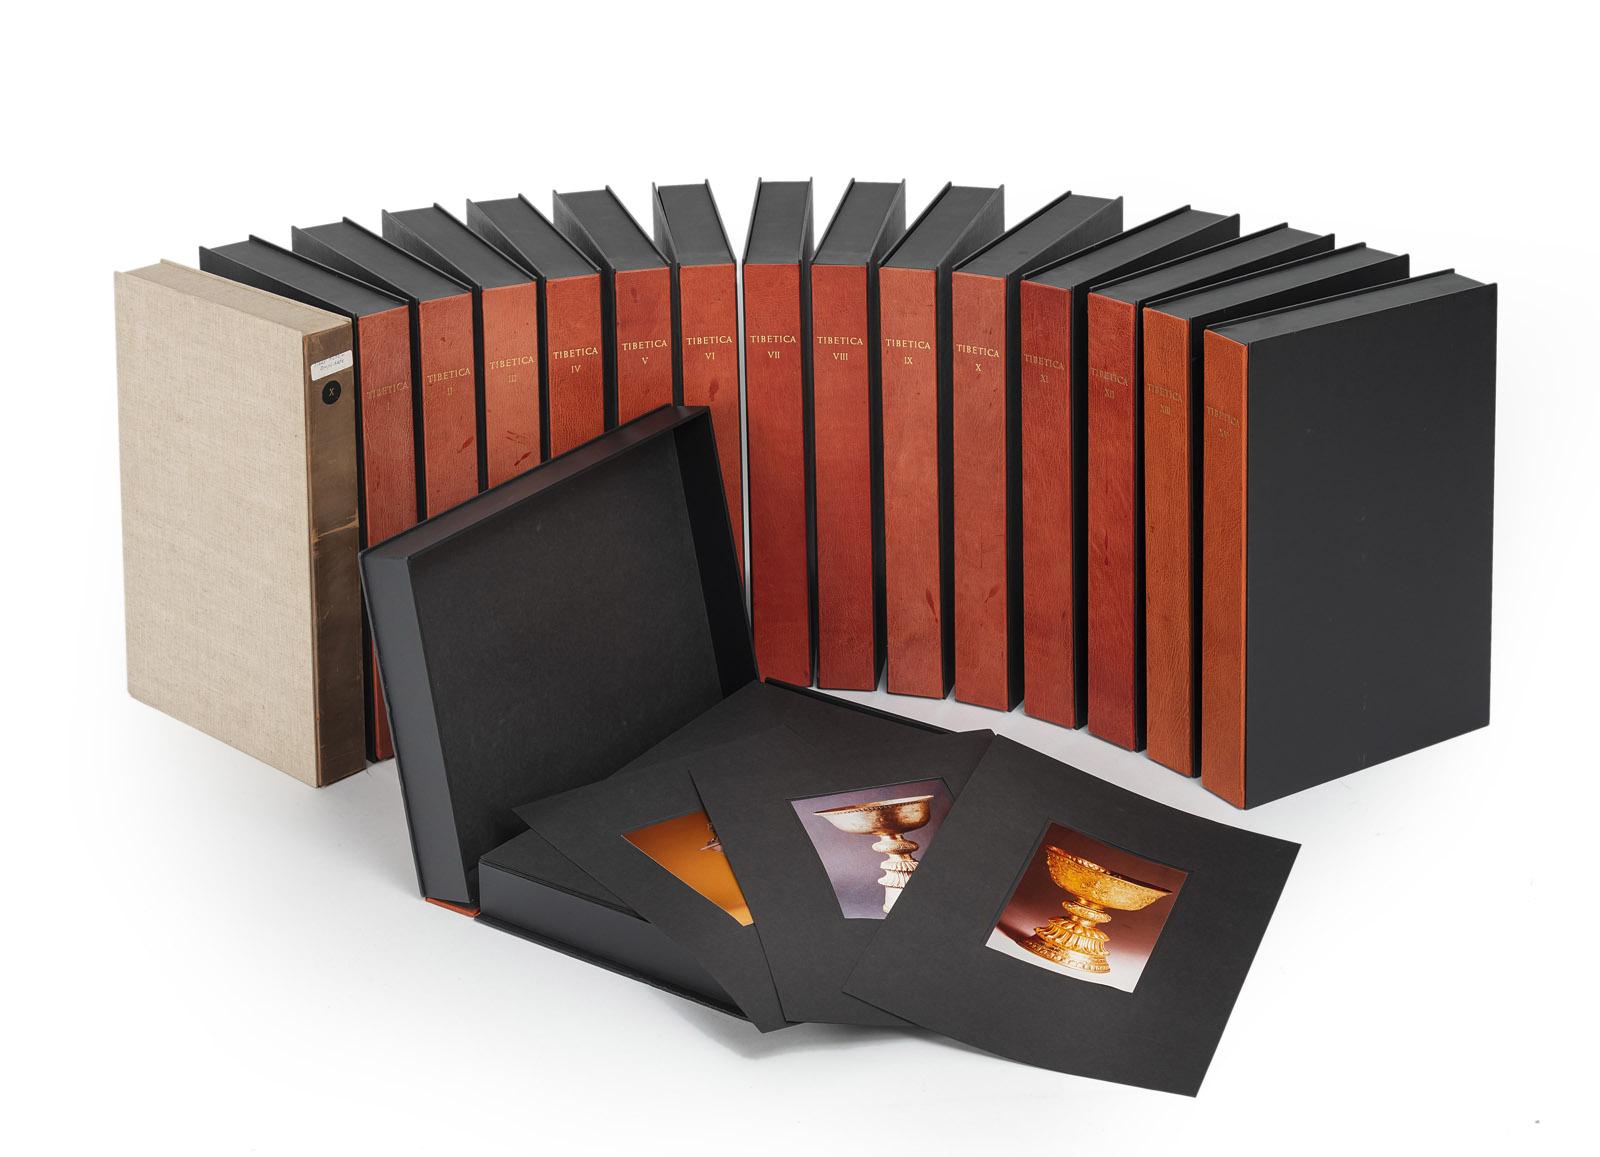 <b>SIXTEEN PHOTO CASES CONTAINING EXTENSIVE PHOTOGRAPHIC DOCUMENTATION OF THE COLLECTION GERD-WOLFGANG ESSEN (1930-2007)</b>